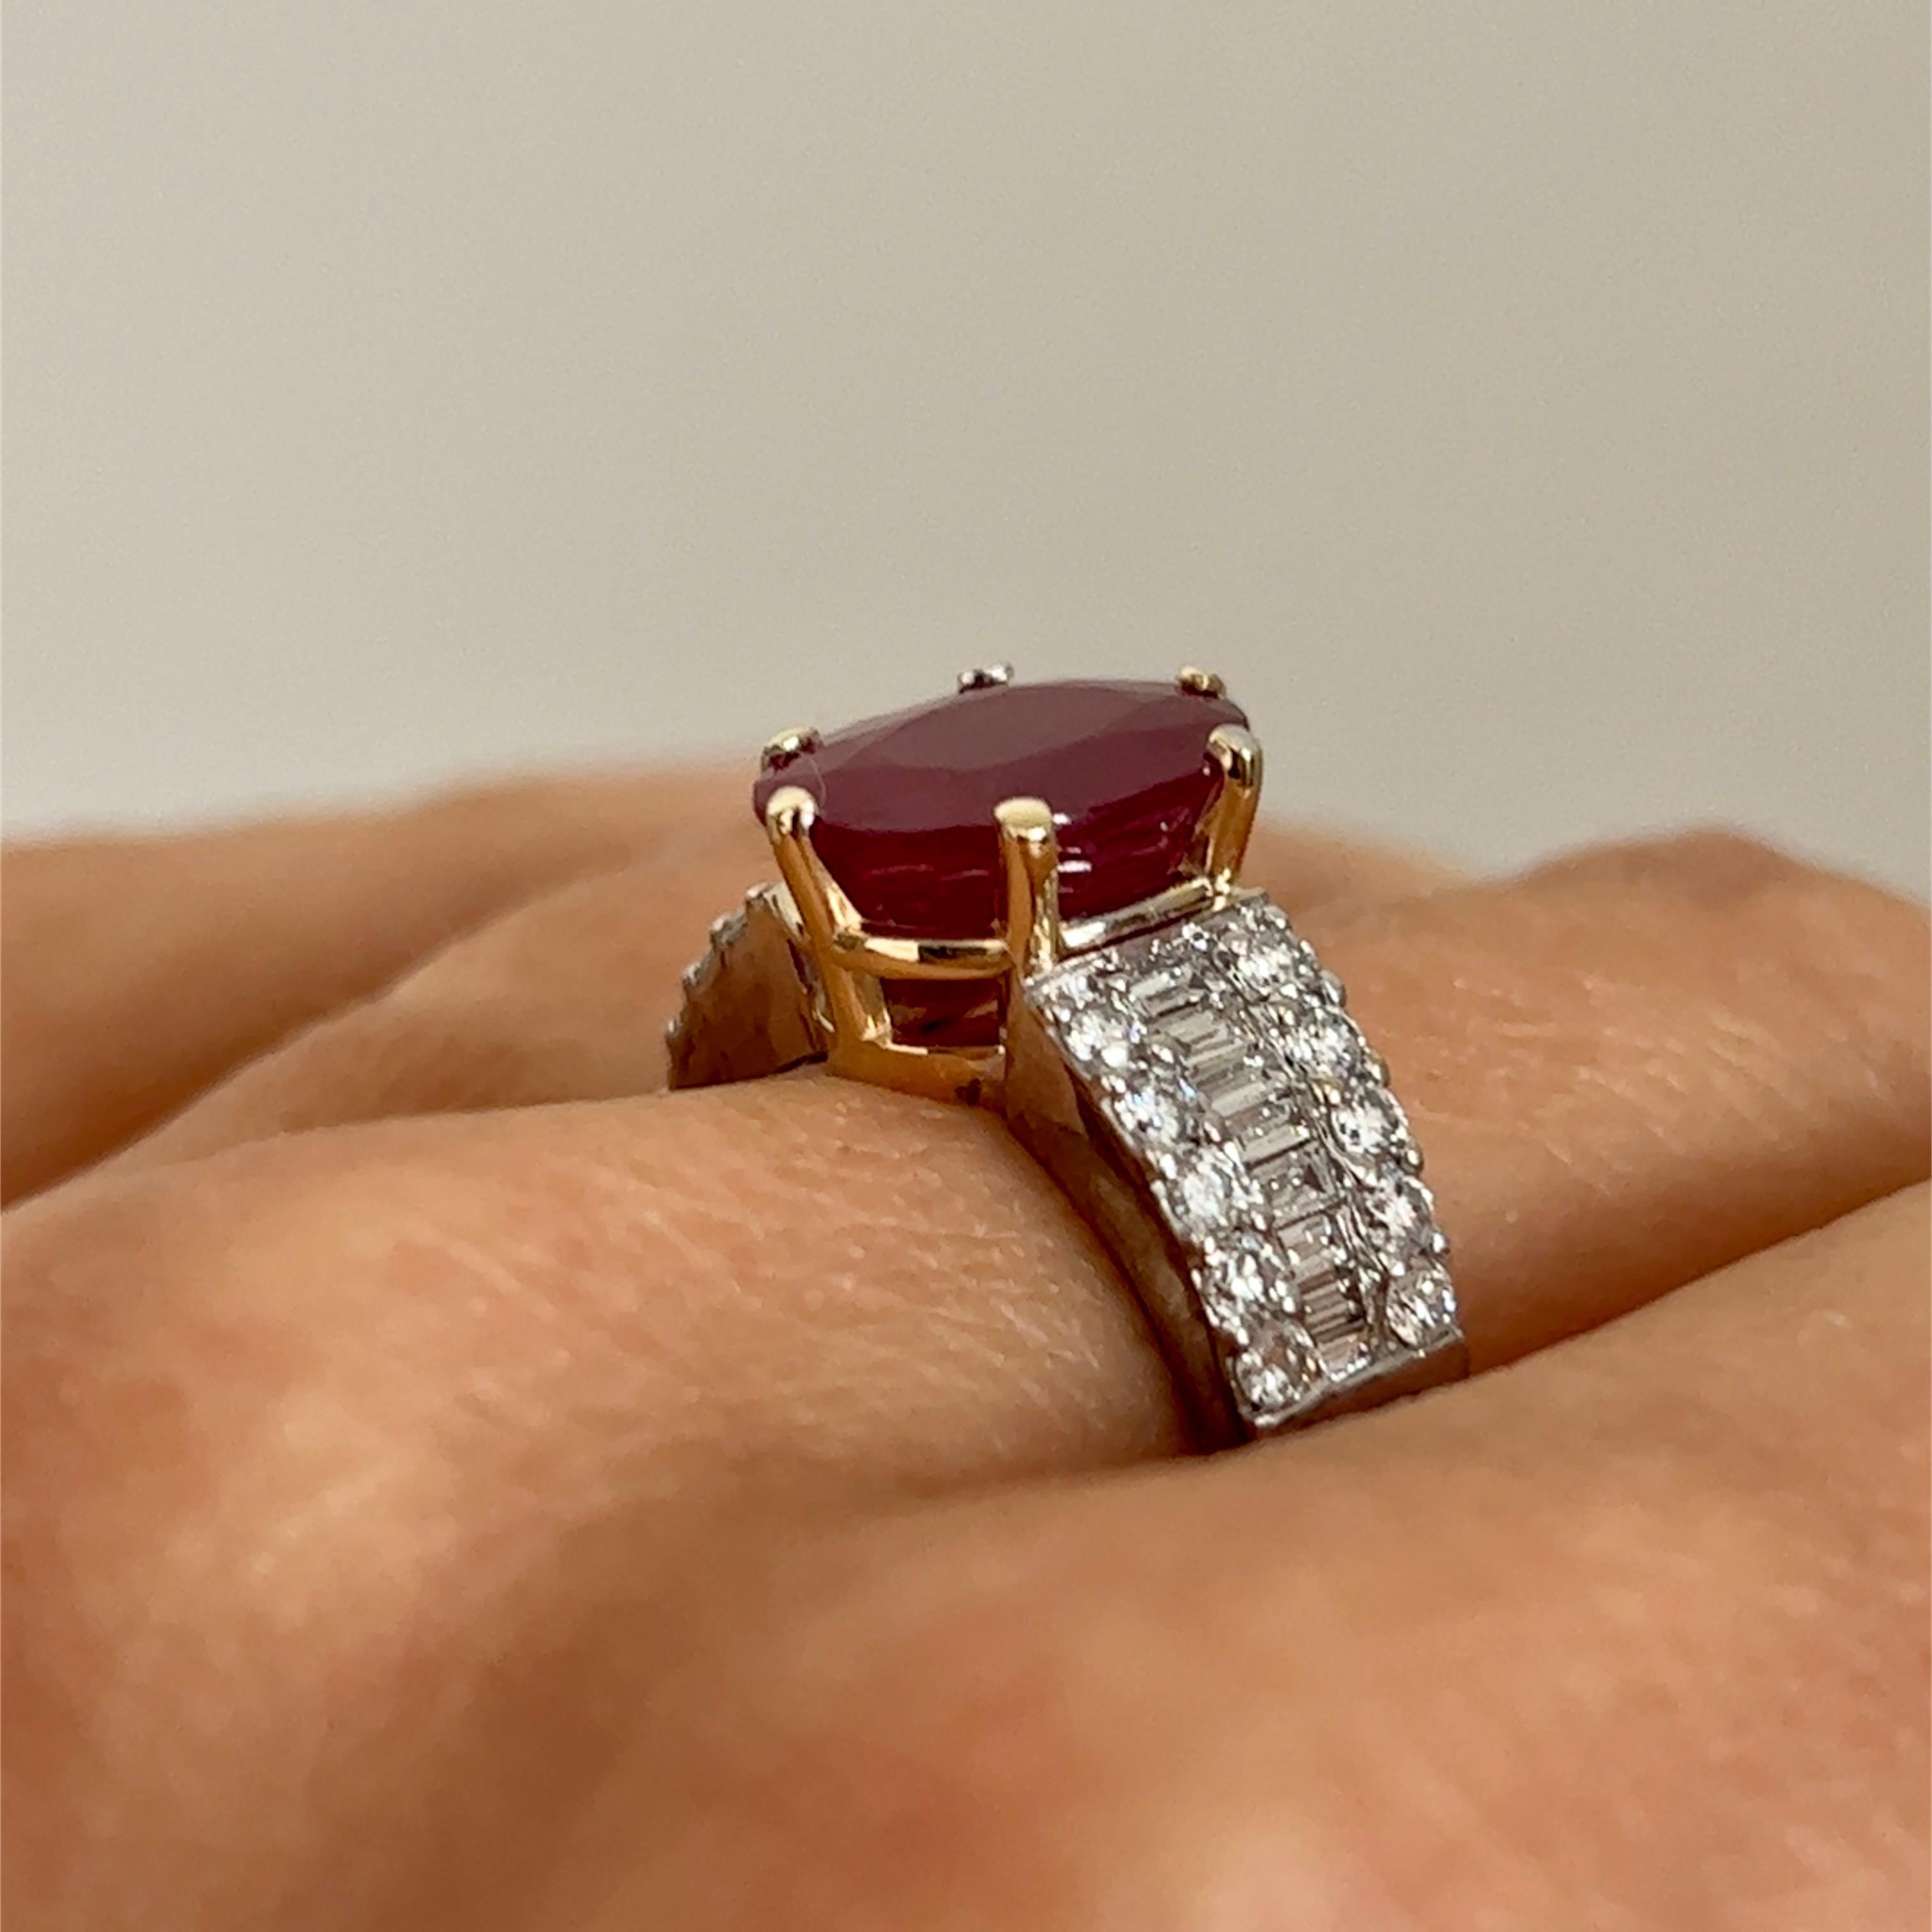 Oval 5.71 Carat Natural Ruby & Diamond Ring in 18K Gold For Sale 2